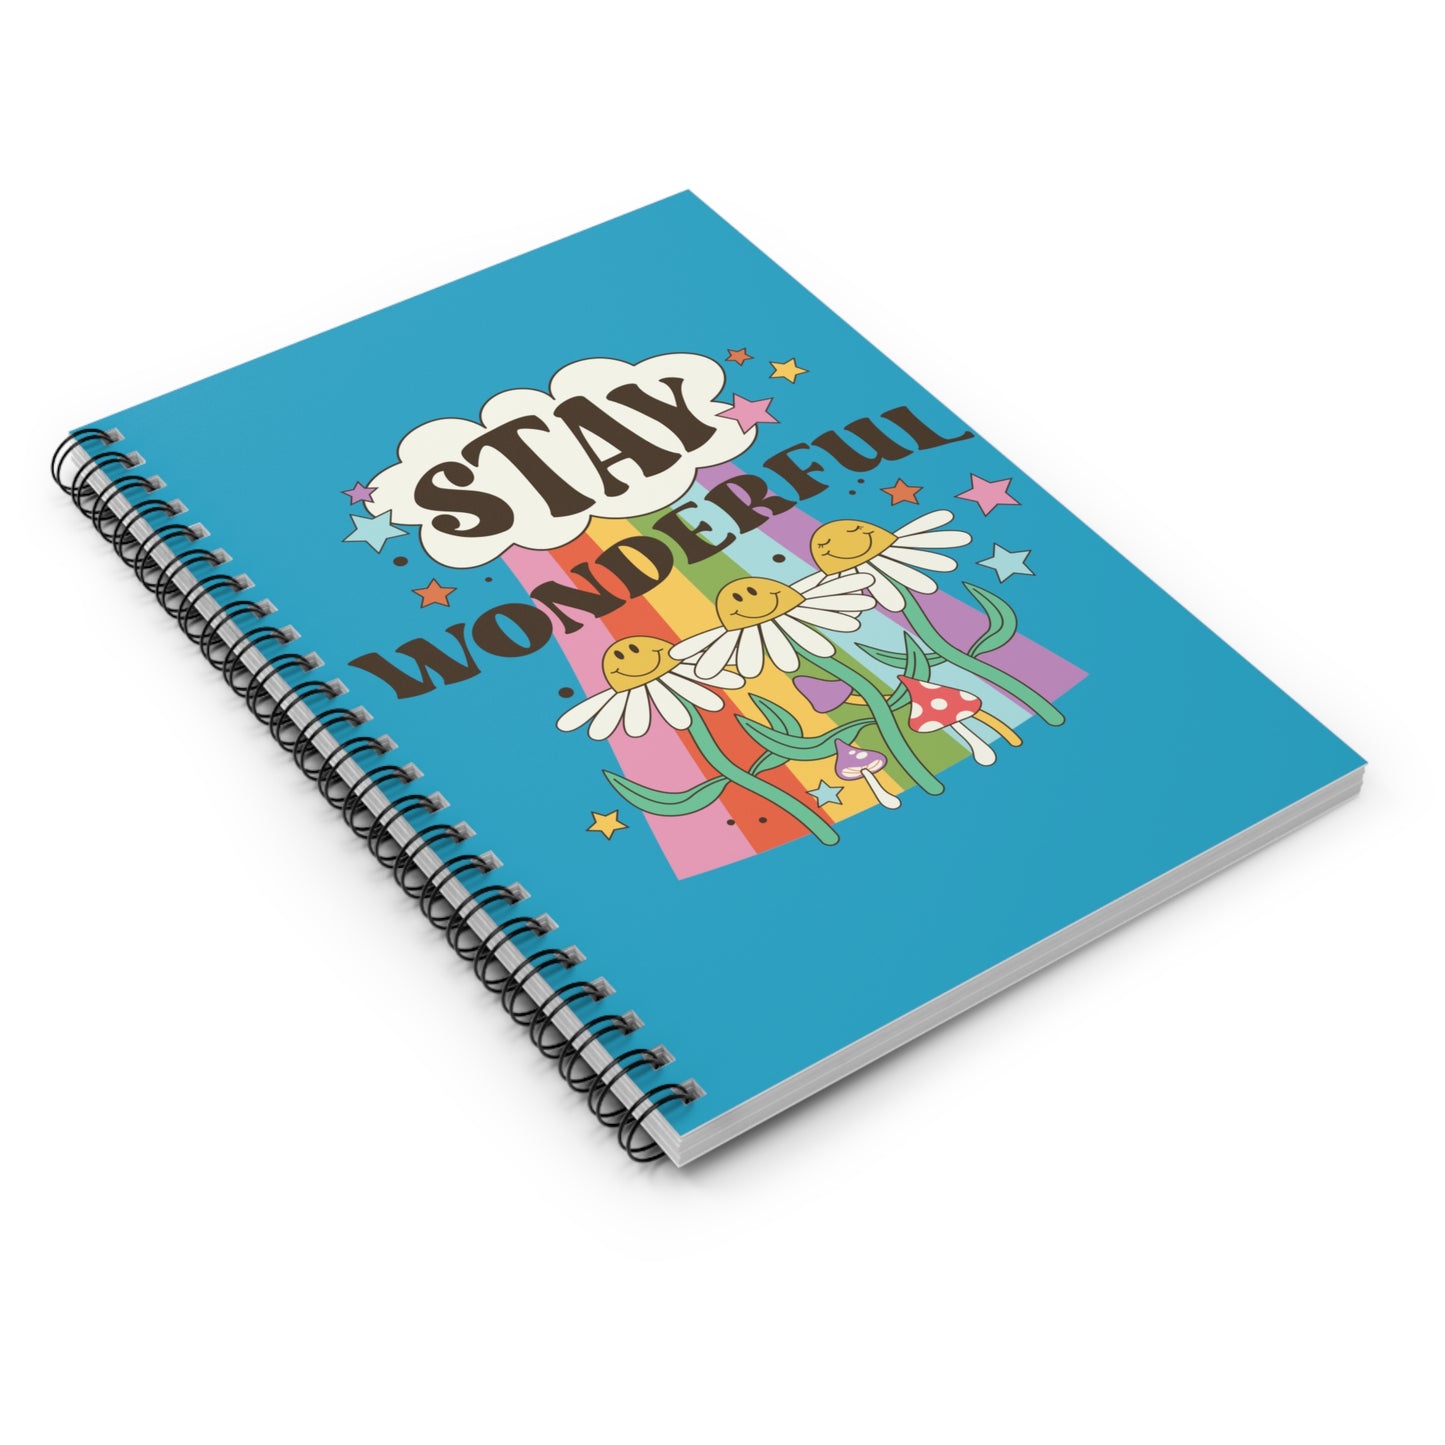 Stay Wonderful: Spiral Notebook - Log Books - Journals - Diaries - and More Custom Printed by TheGlassyLass.com